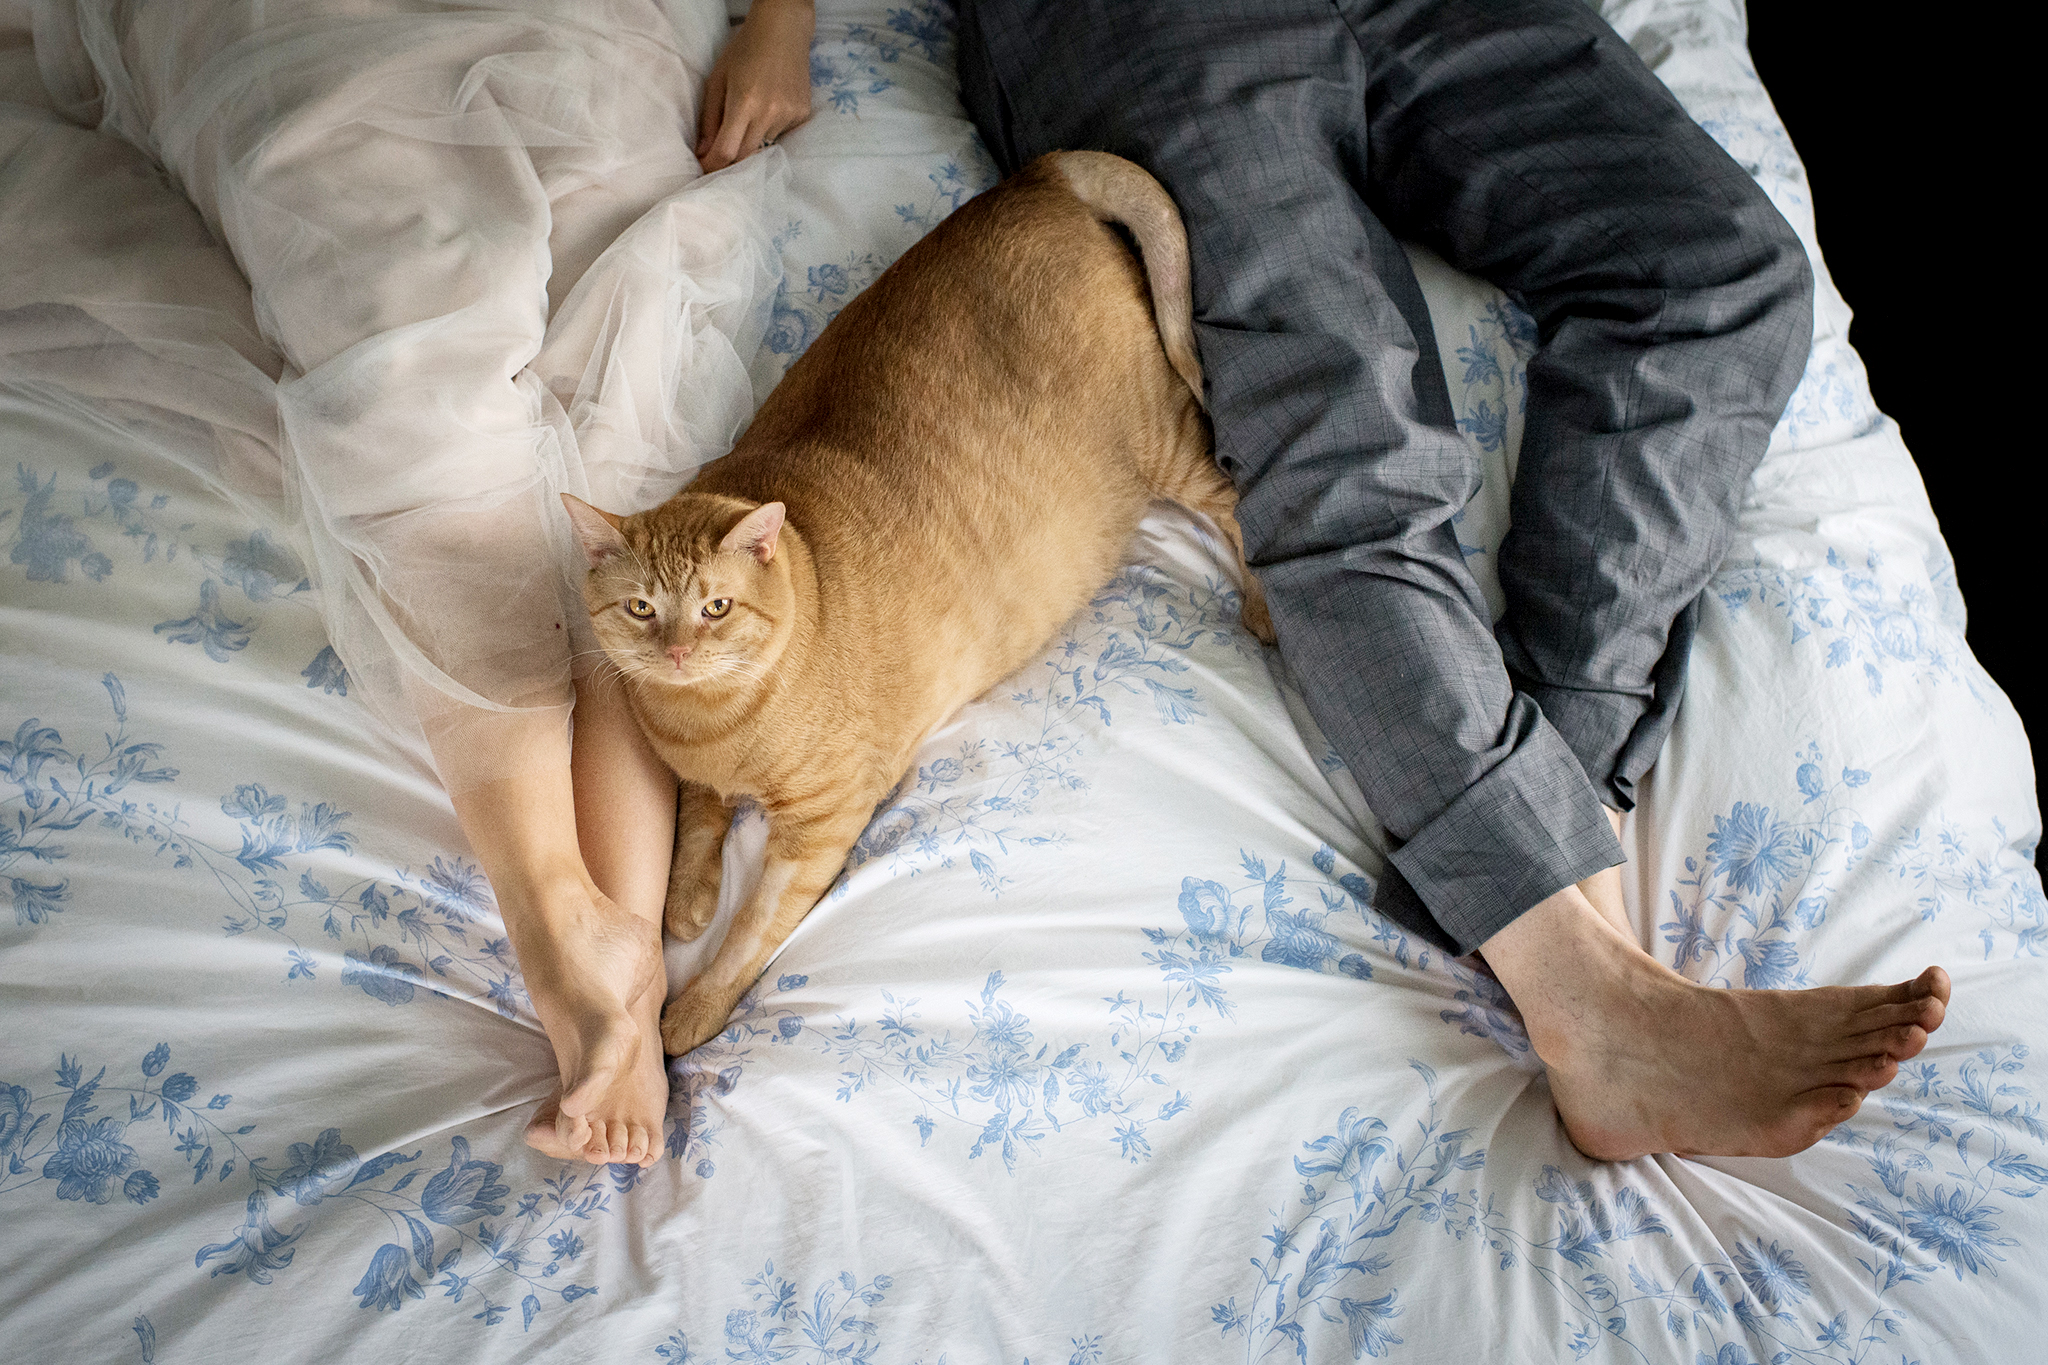 PHOTO: Vito, a 35-pound feline, joined his new owners, Kiah Berkeley and Peter Sorkin of Mount Rainier, Maryland, during their wedding-day photo shoot on July 8, 2017. 